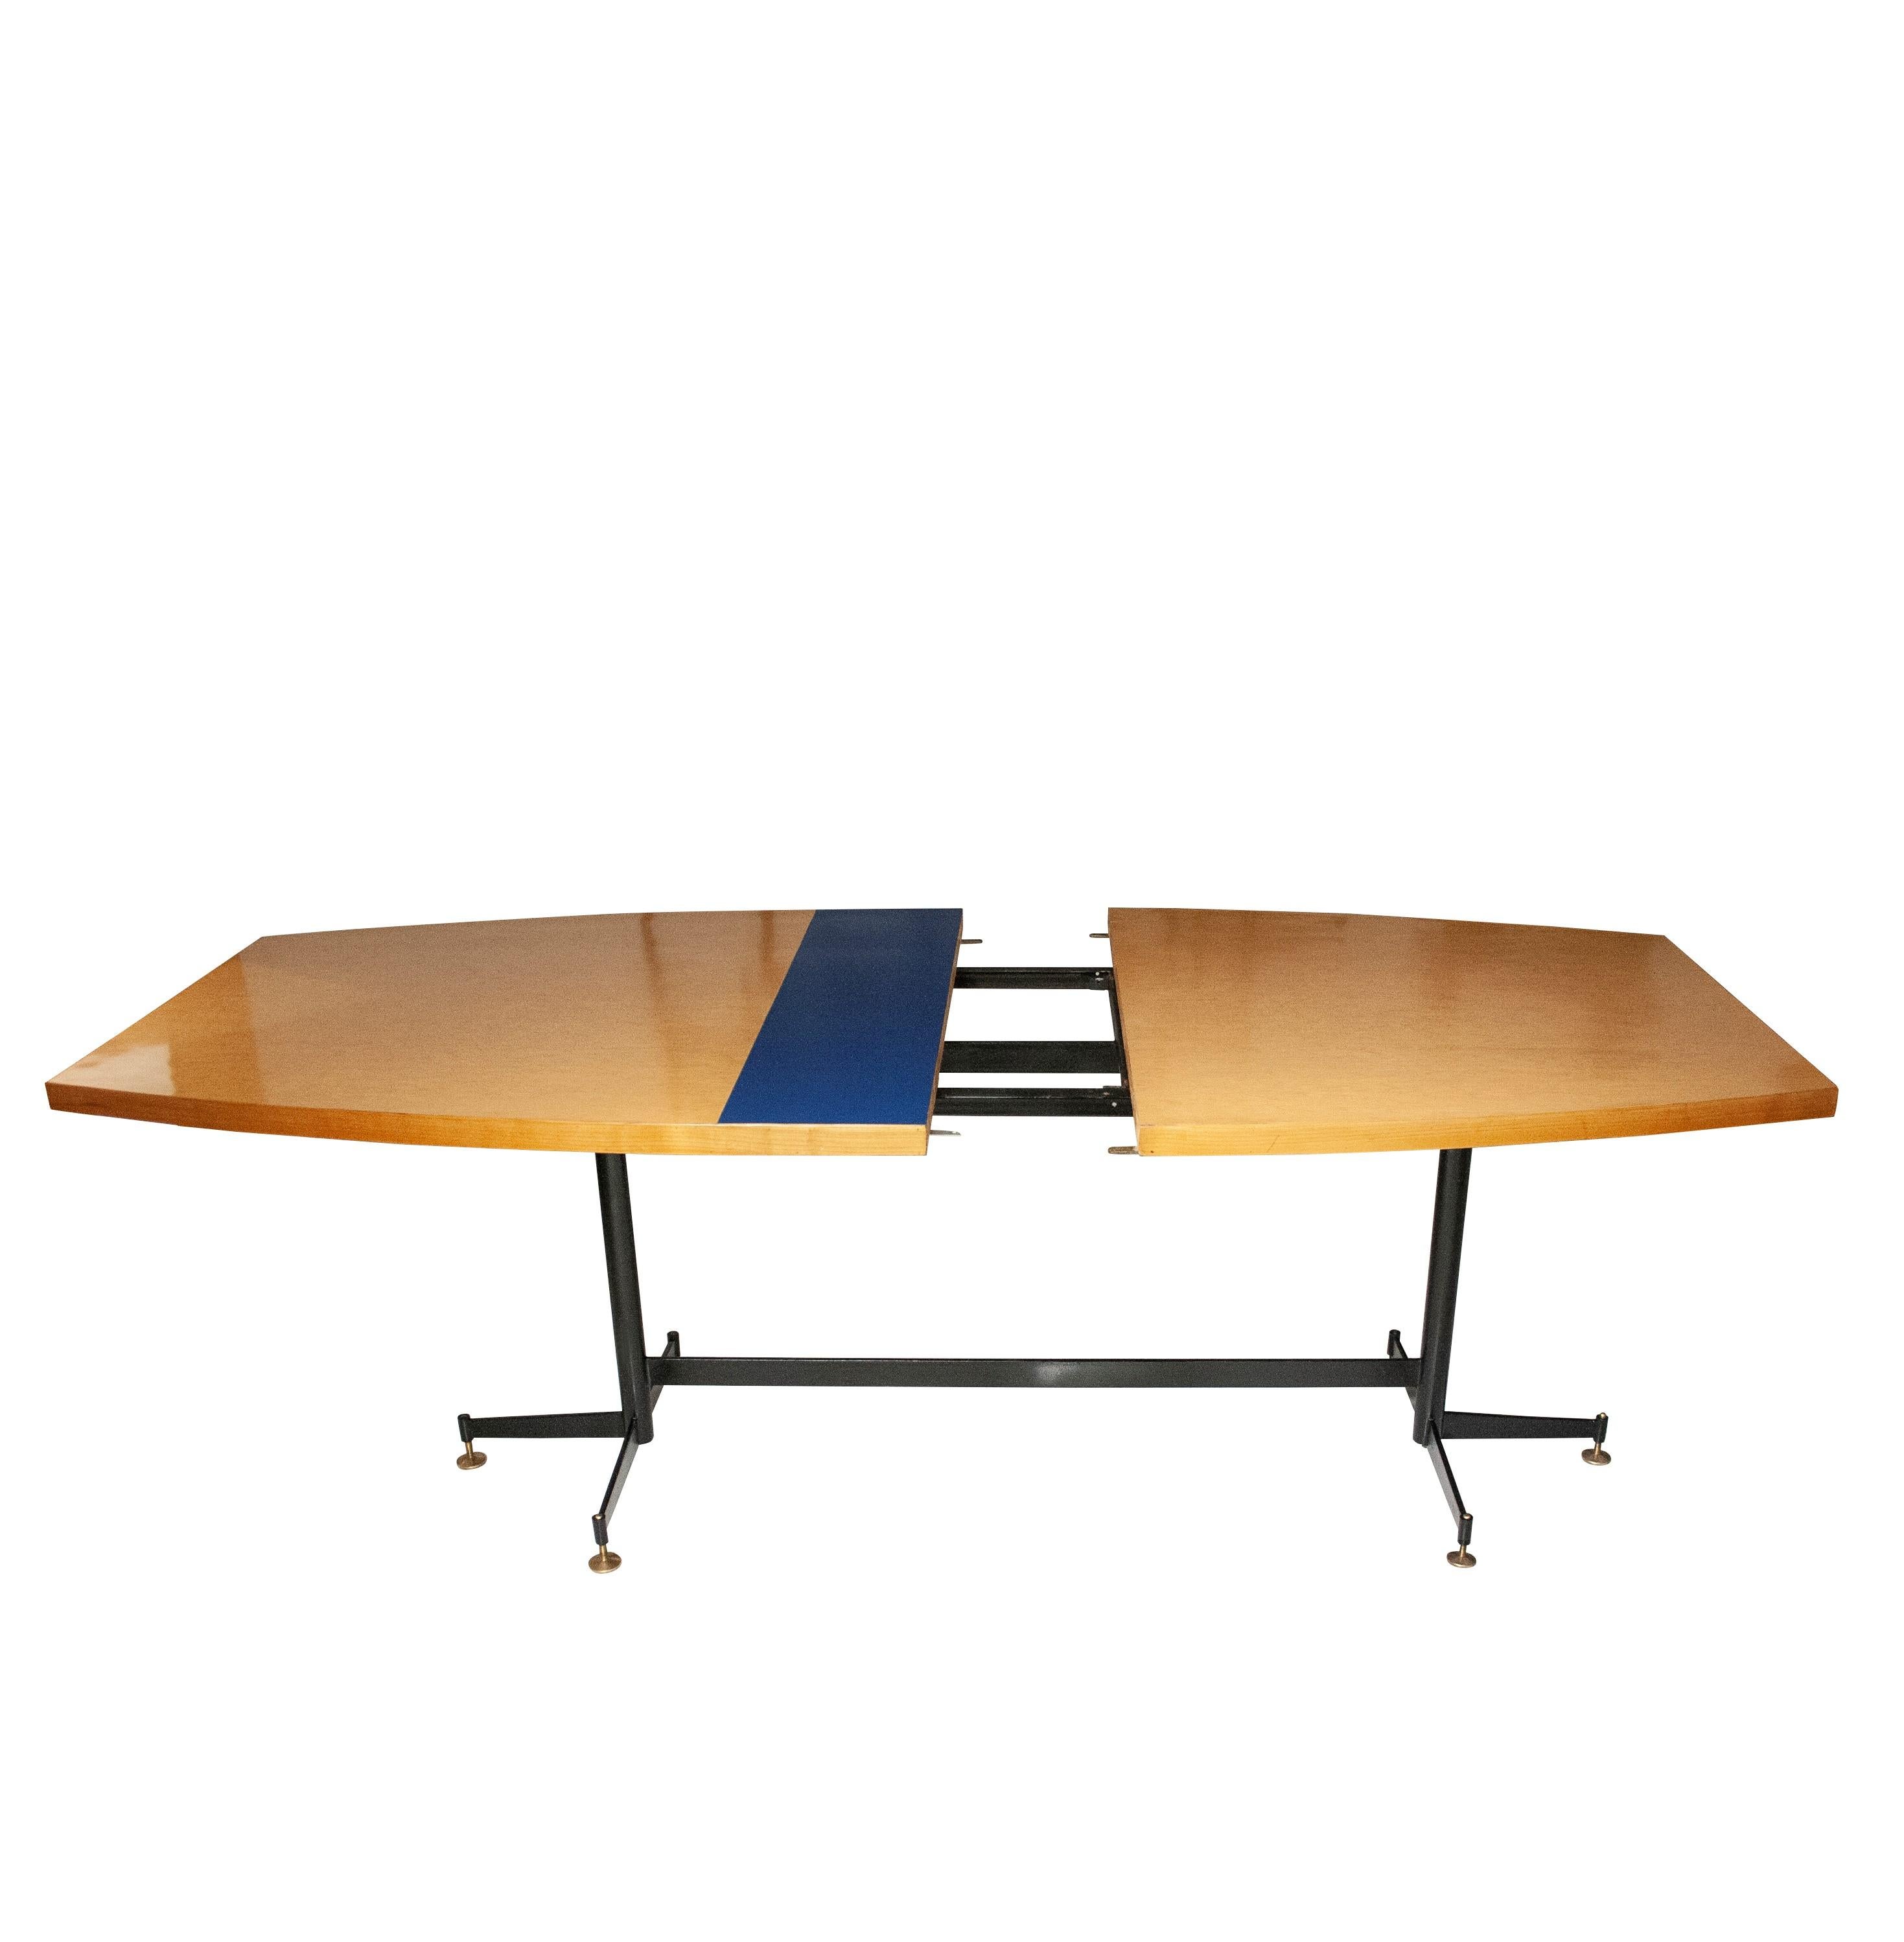 Extendable table designed by Luigi Scremin (1897-1983). Board made of birch wood with a blue laminated central detail. The base structure consists of black lacquered iron with adjustable bronze pad details. Extended lenght: 260cm. 